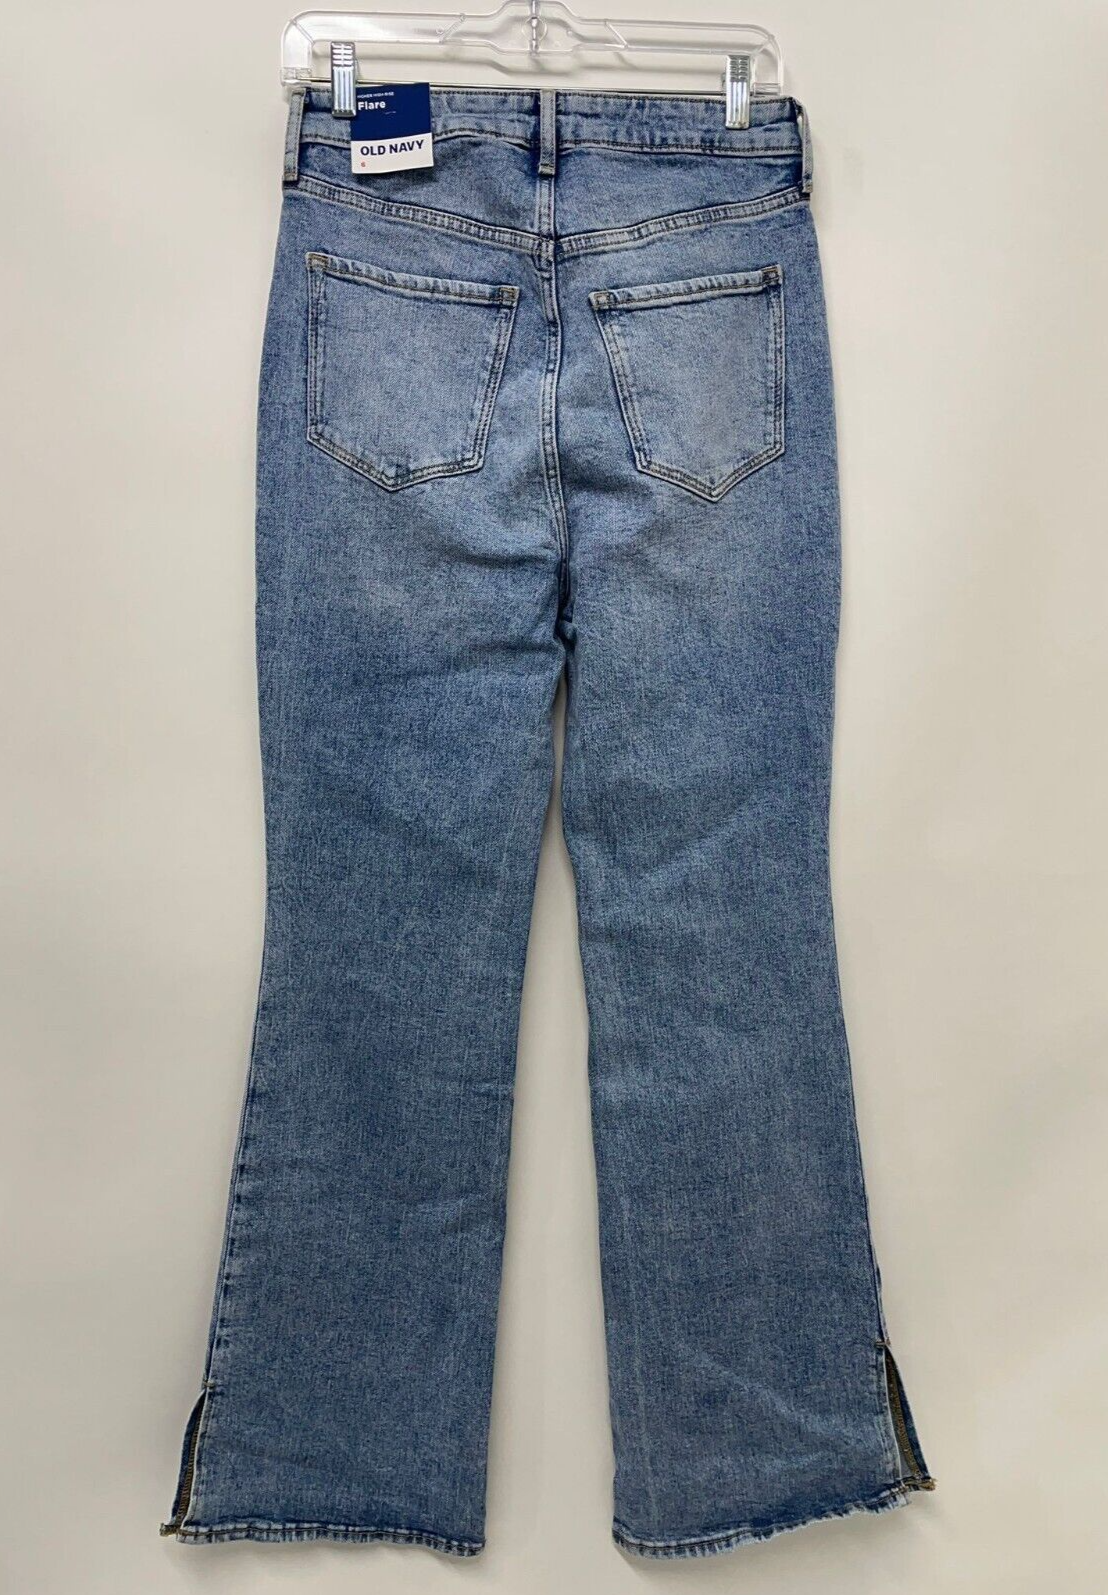 Old Navy Women's 6 Higher High-Rise Side Slit Flare Jeans Medium Wash Blue NWT